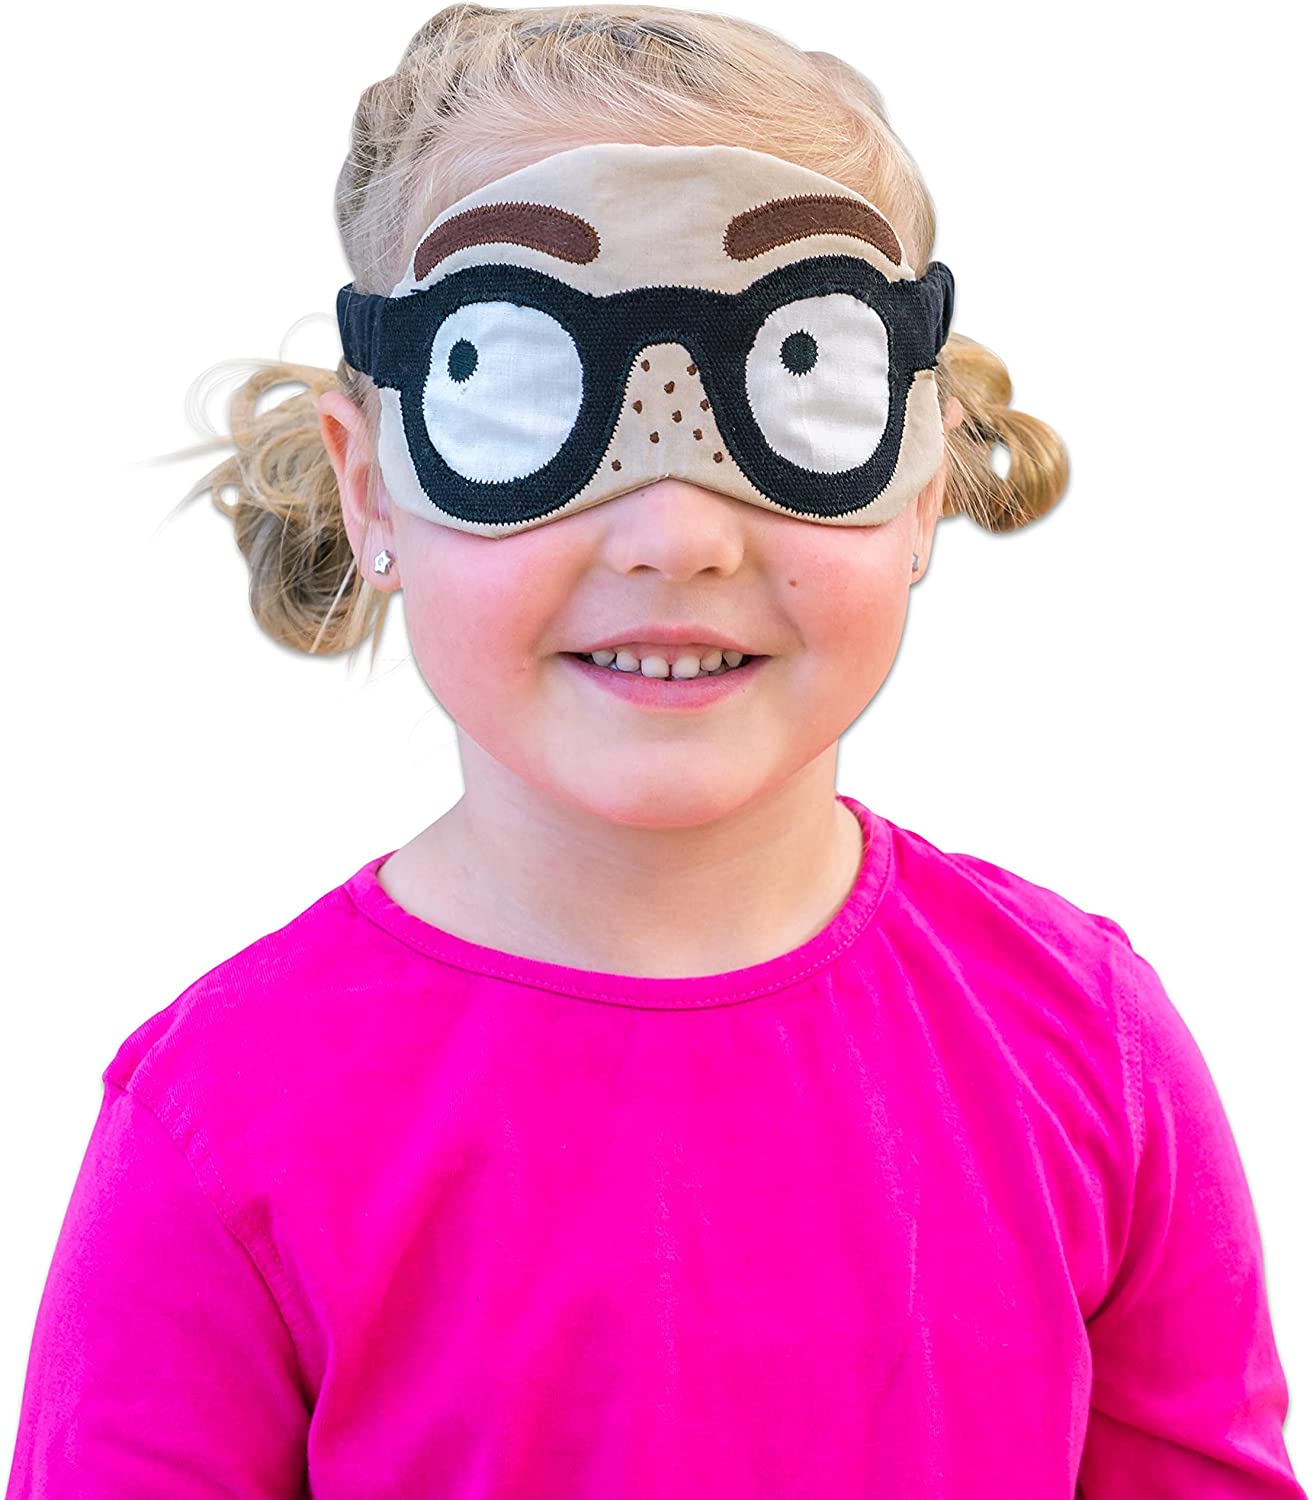 Betzold - Blindfold - Eye mask for children, ideal for experiments and game